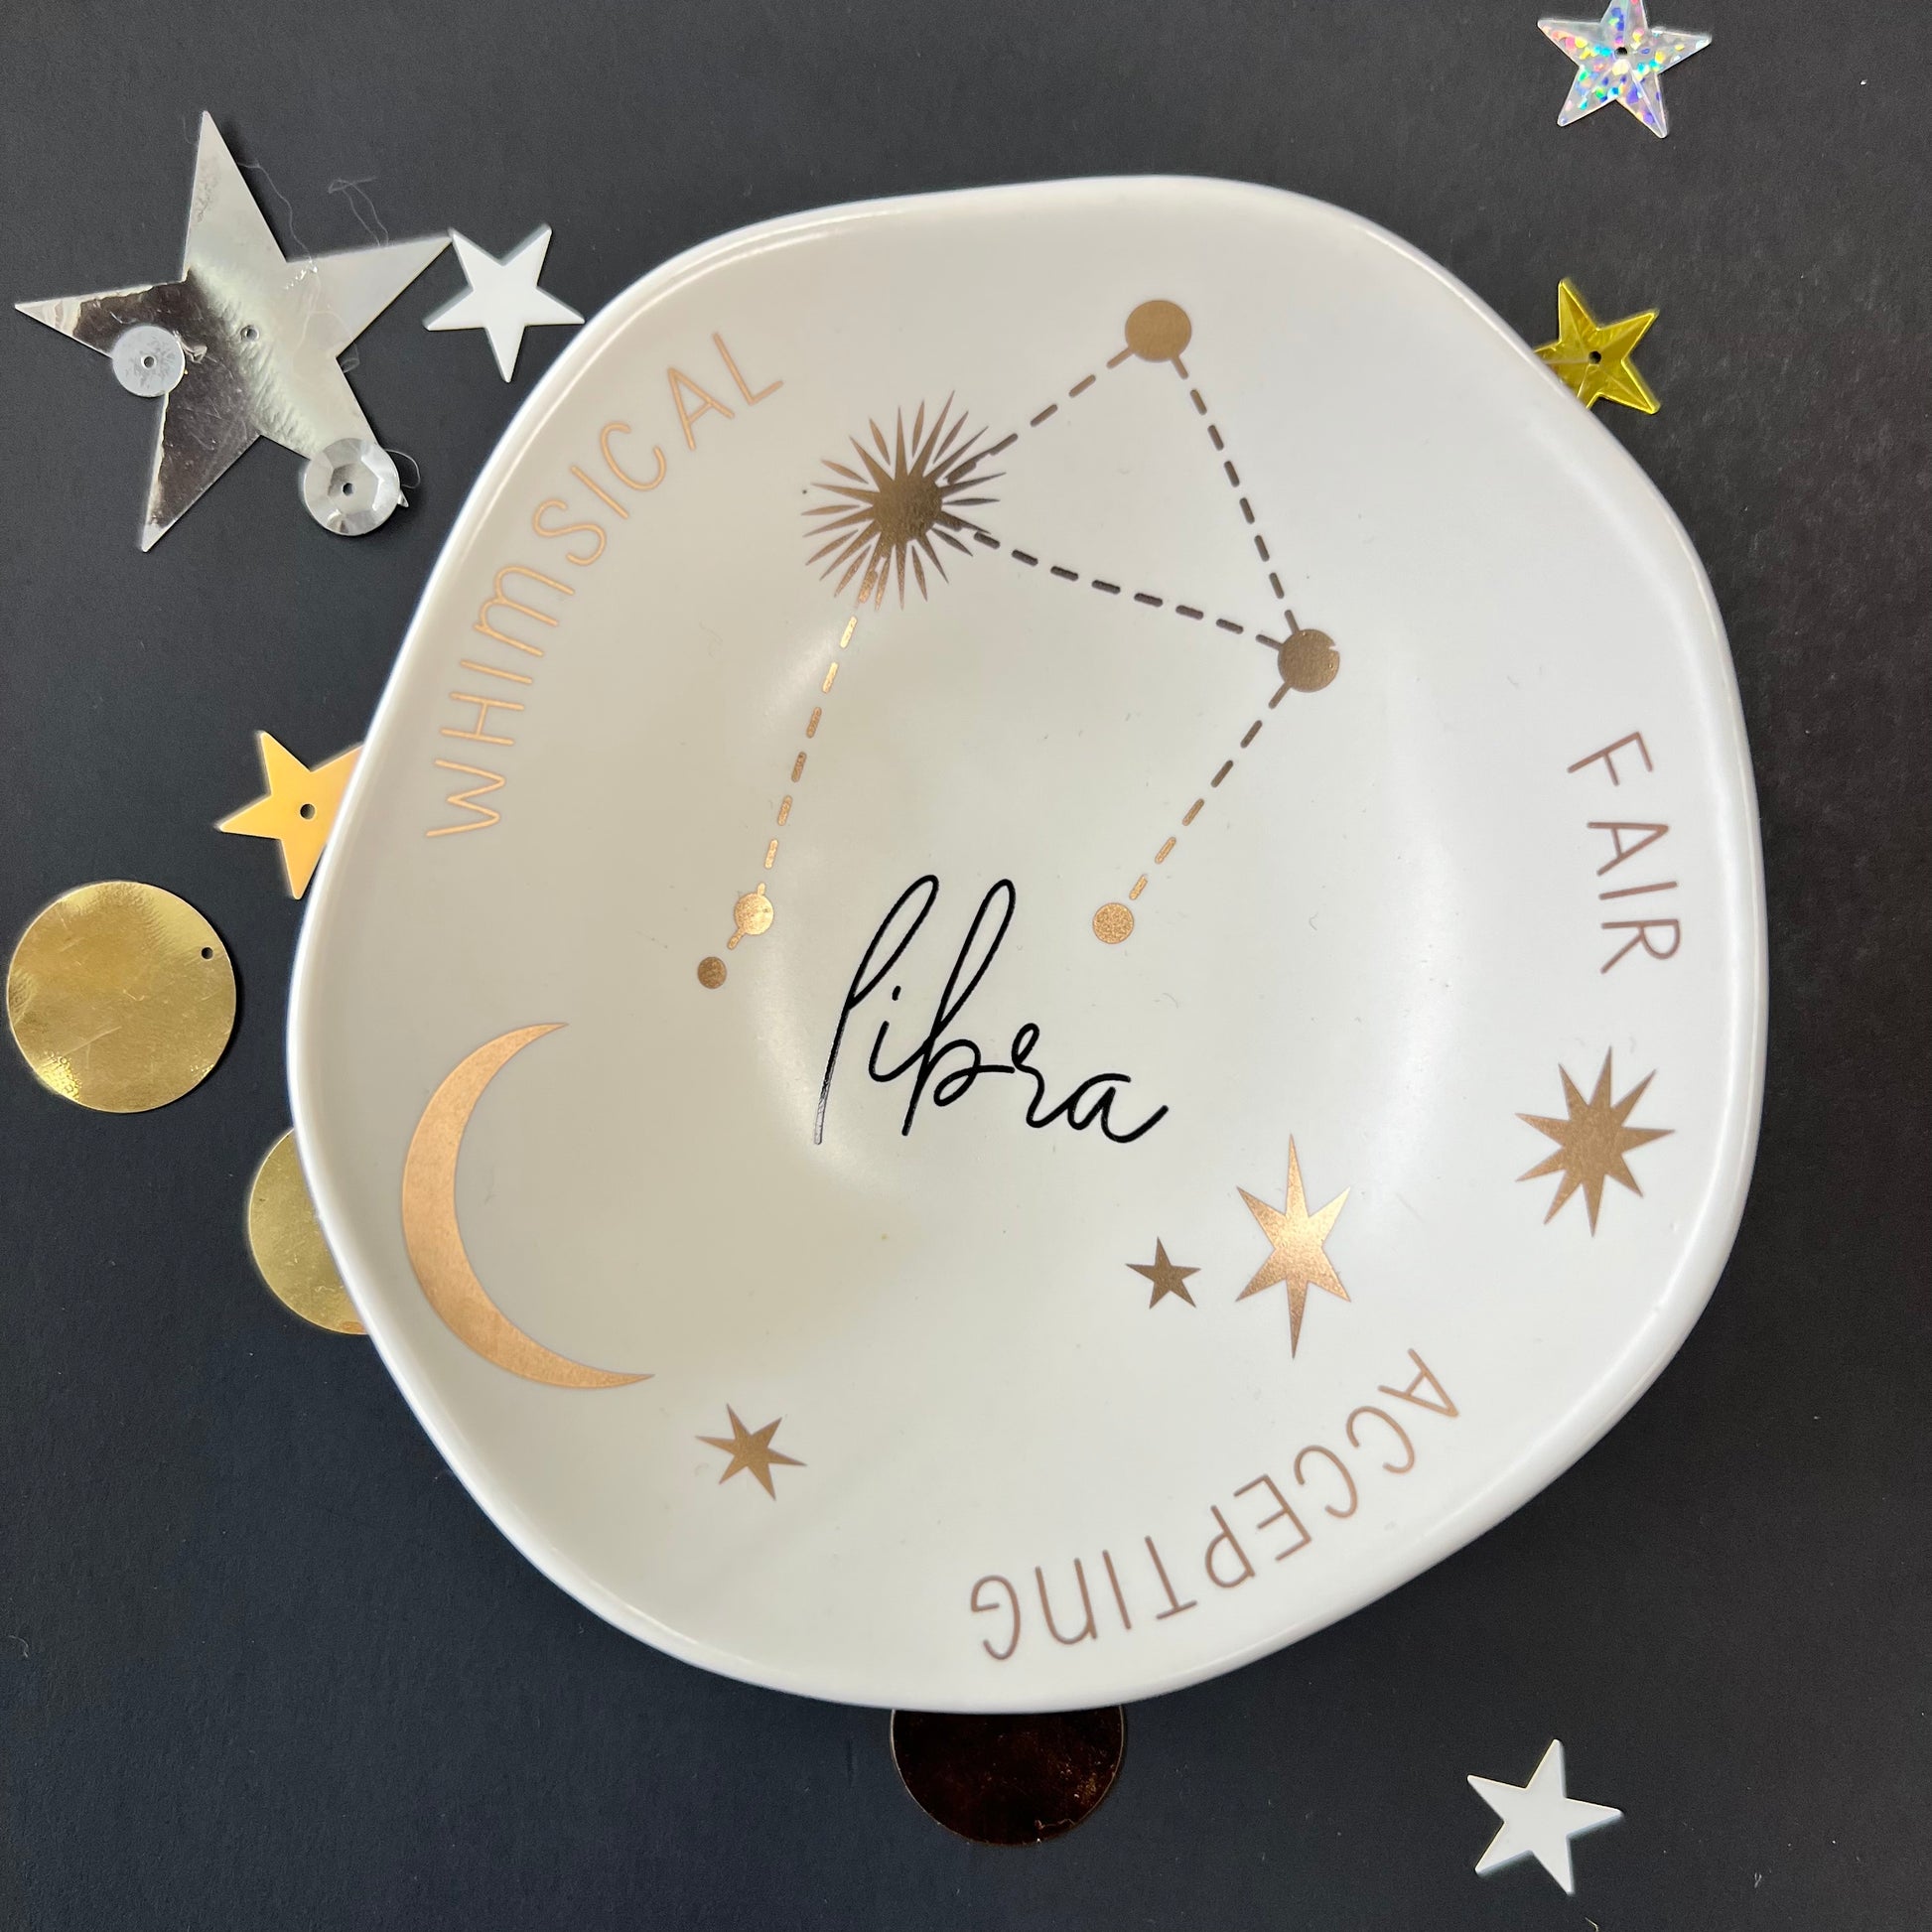 cream dish with gold stars and "Libra Whimsical Fair Accepting" around the inner rim on a black background with scattered stars and orbs.